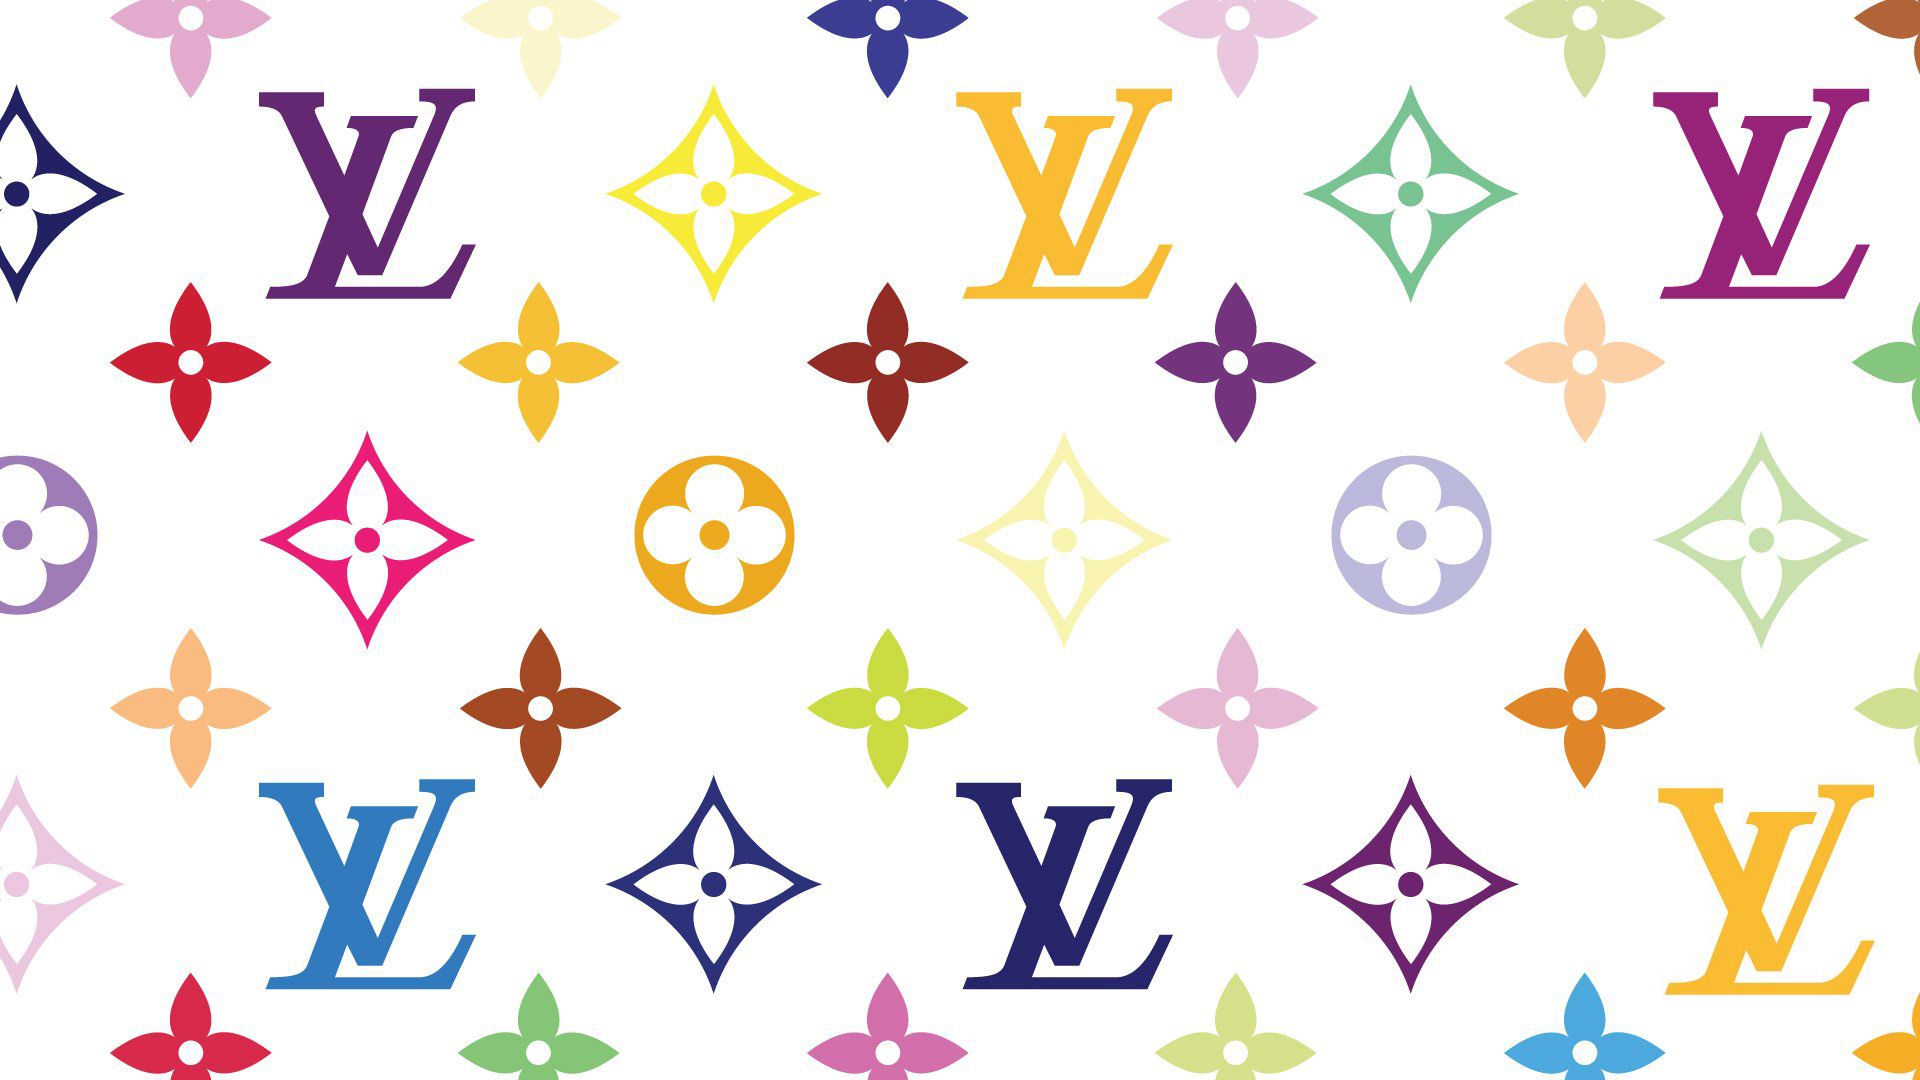 Louis Vuitton Word With Flower Symbol In Black Background HD Louis Vuitton  Wallpapers, HD Wallpapers